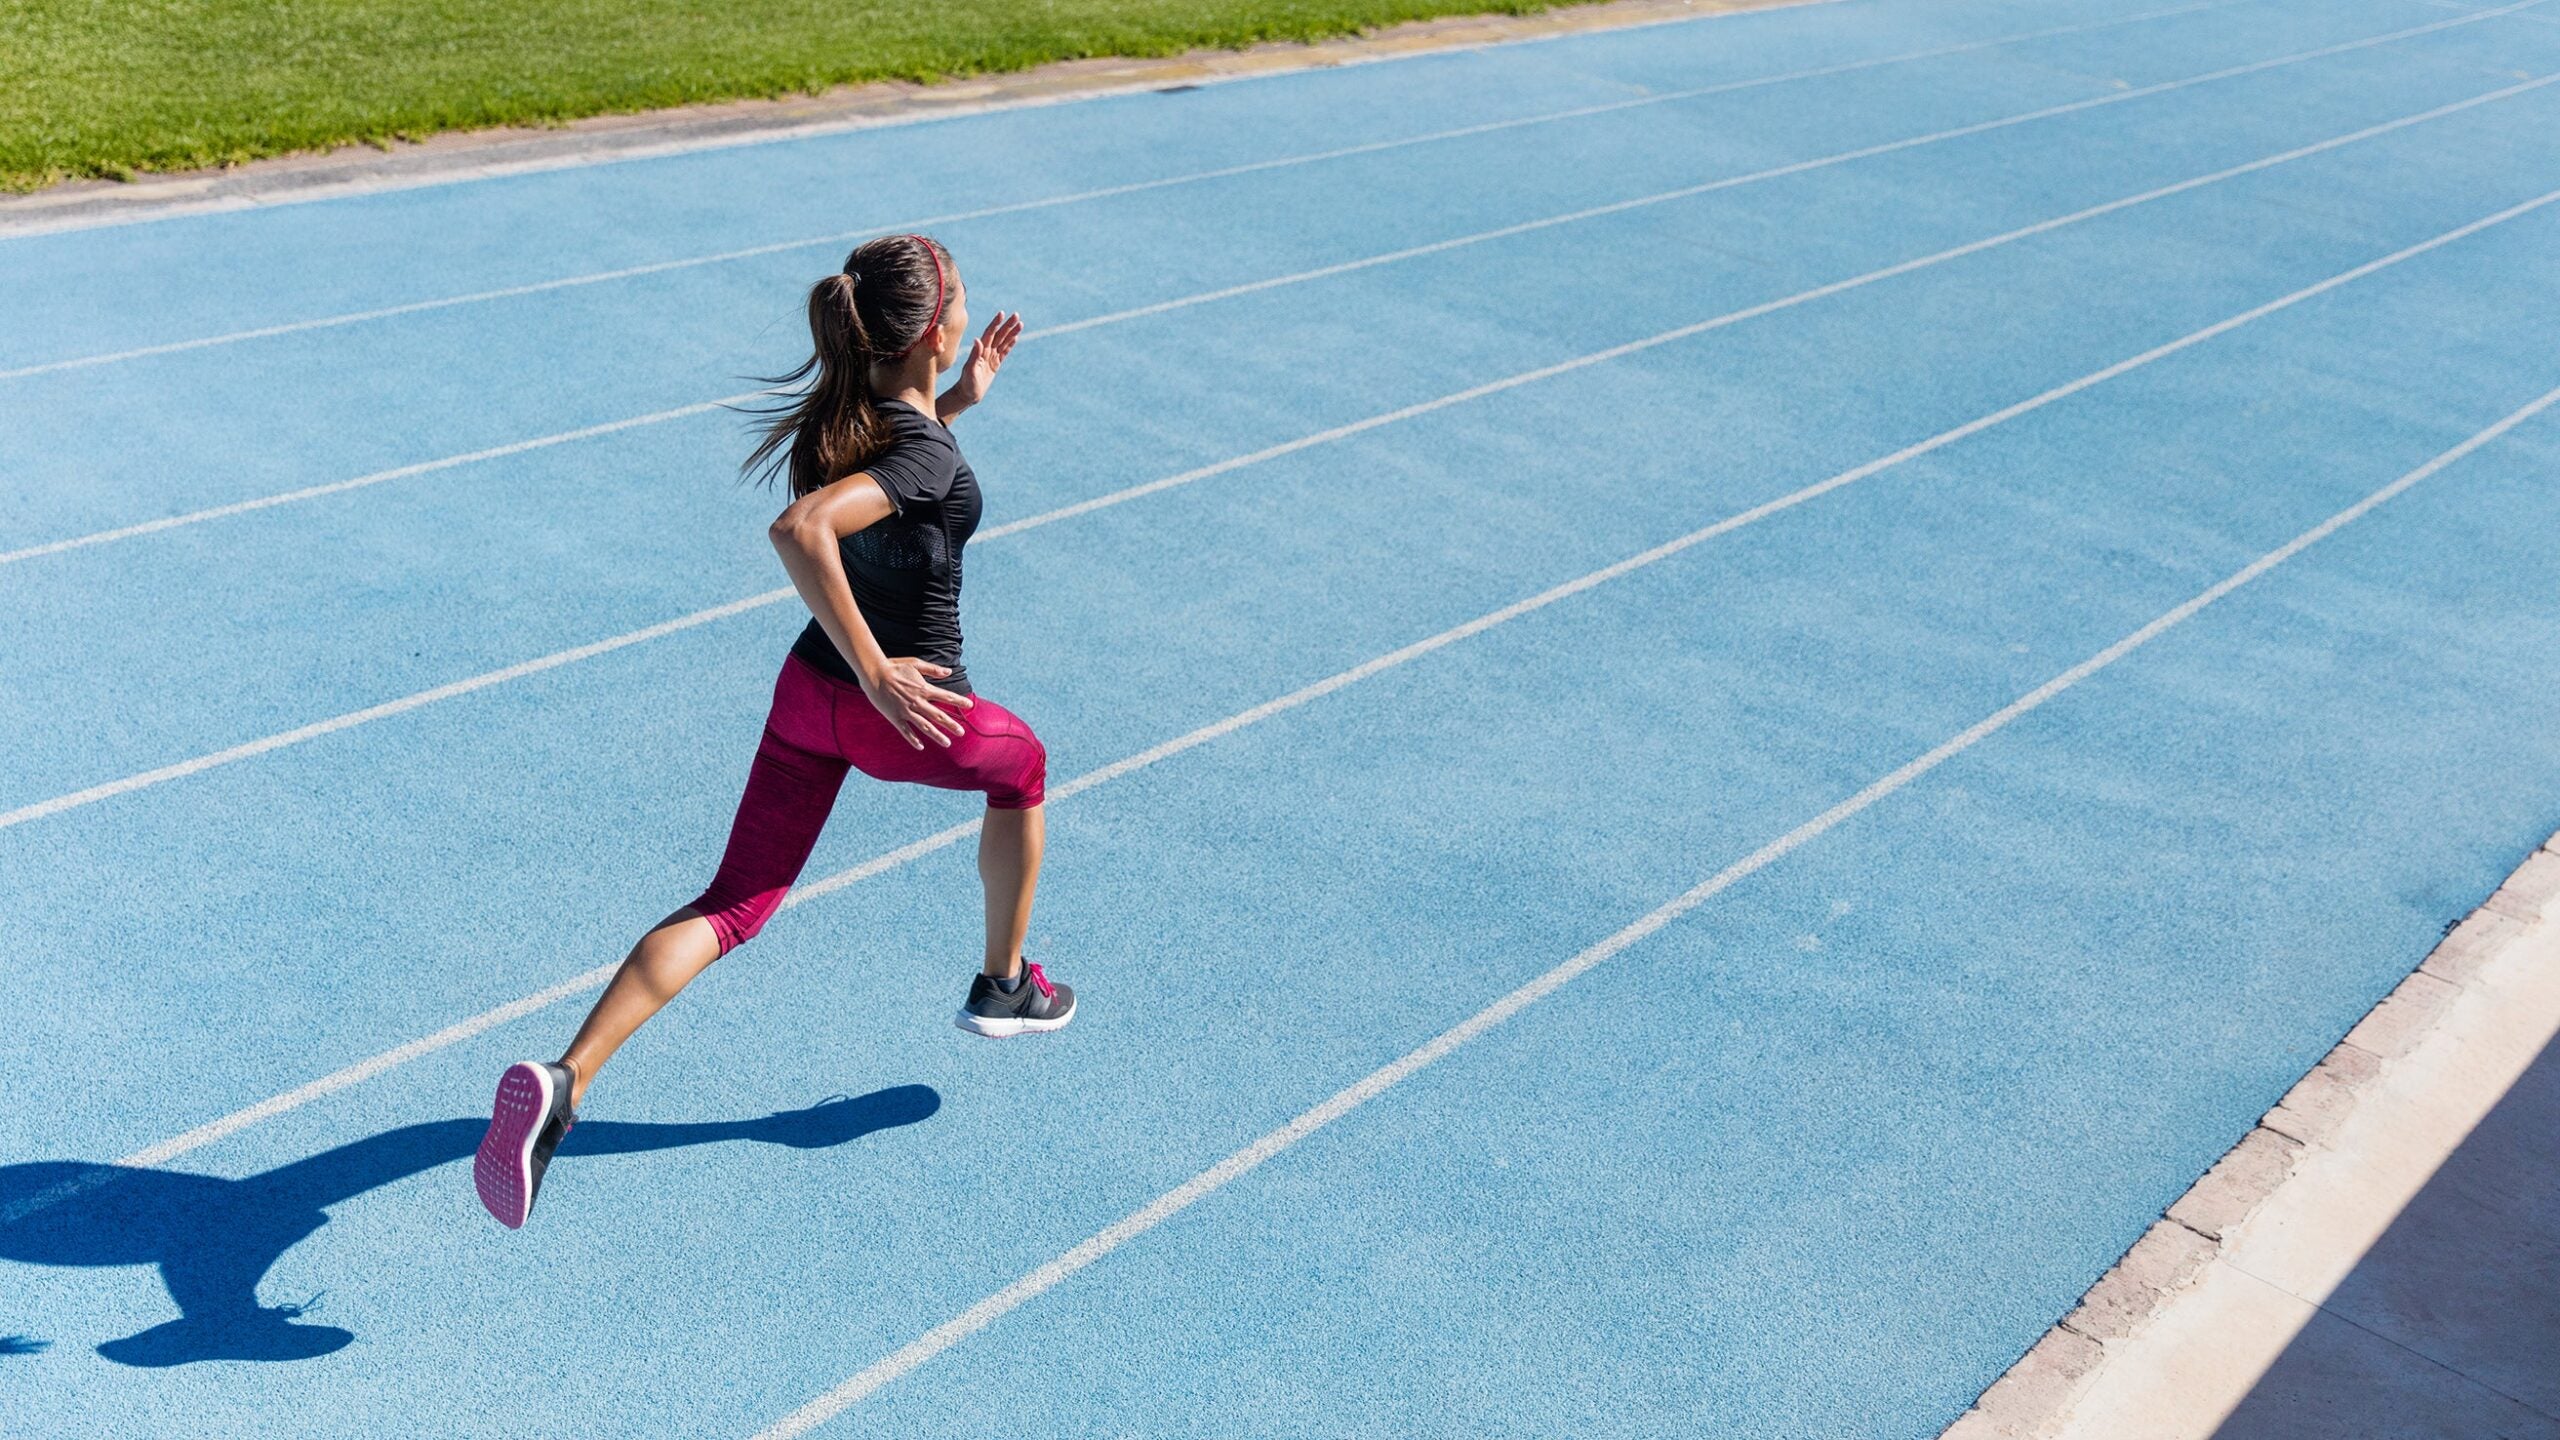 Female distance runners improve health - and speed - with better